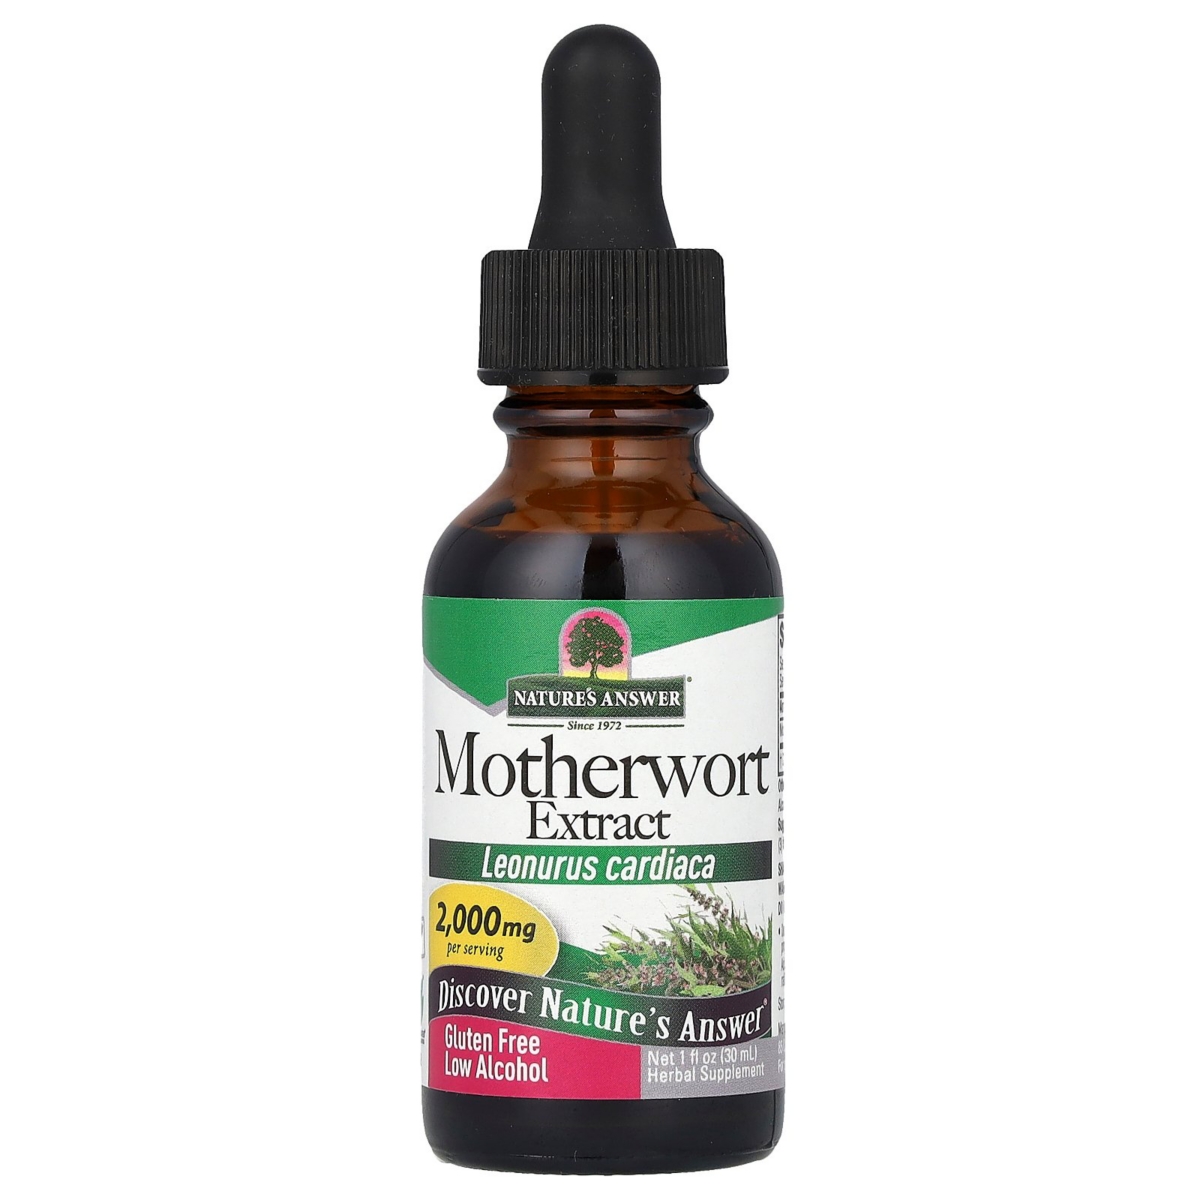 Motherwort Extract 2 000 mg - 1 fl oz (30 ml) - Assorted Pre-pack (See Table